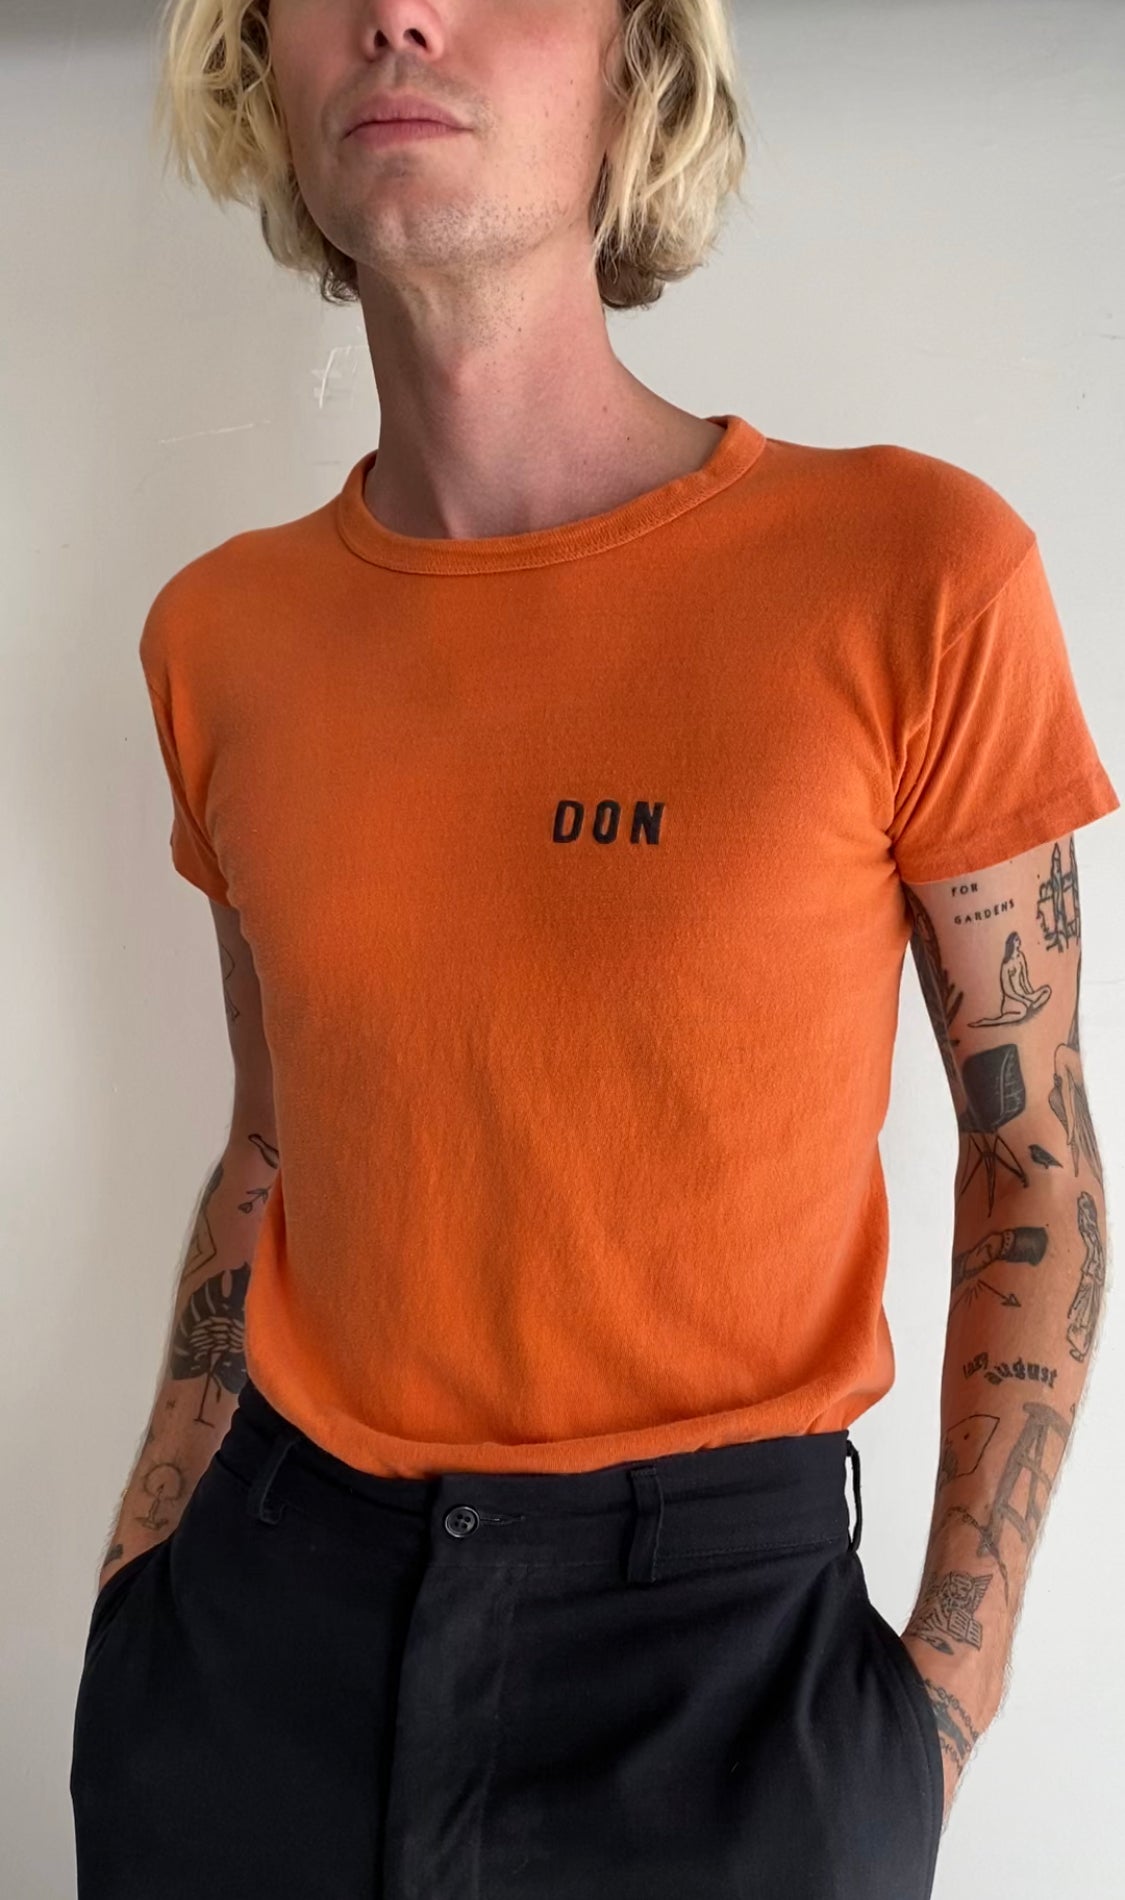 1980s Don T-Shirt (S/M)